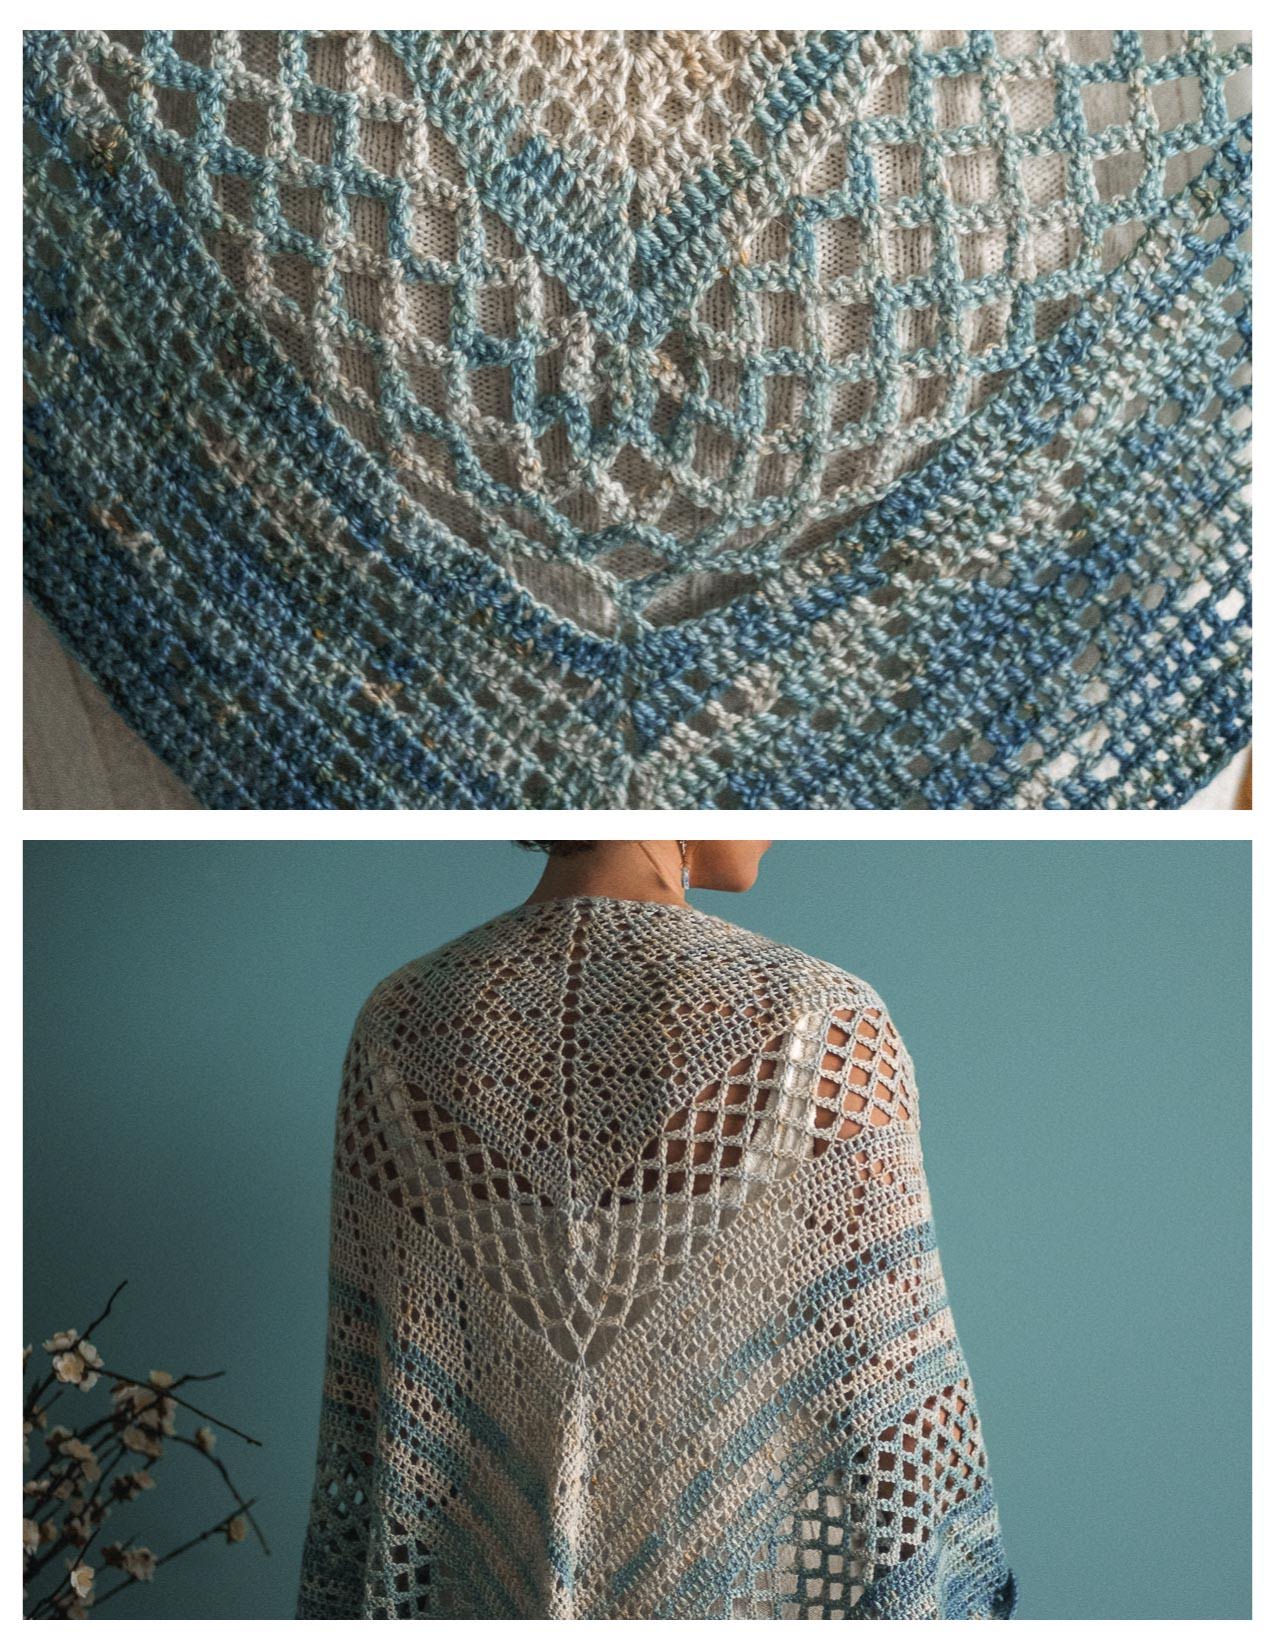 Crochet This Airy Summer Shawl Today – Adamas - Expression Fiber